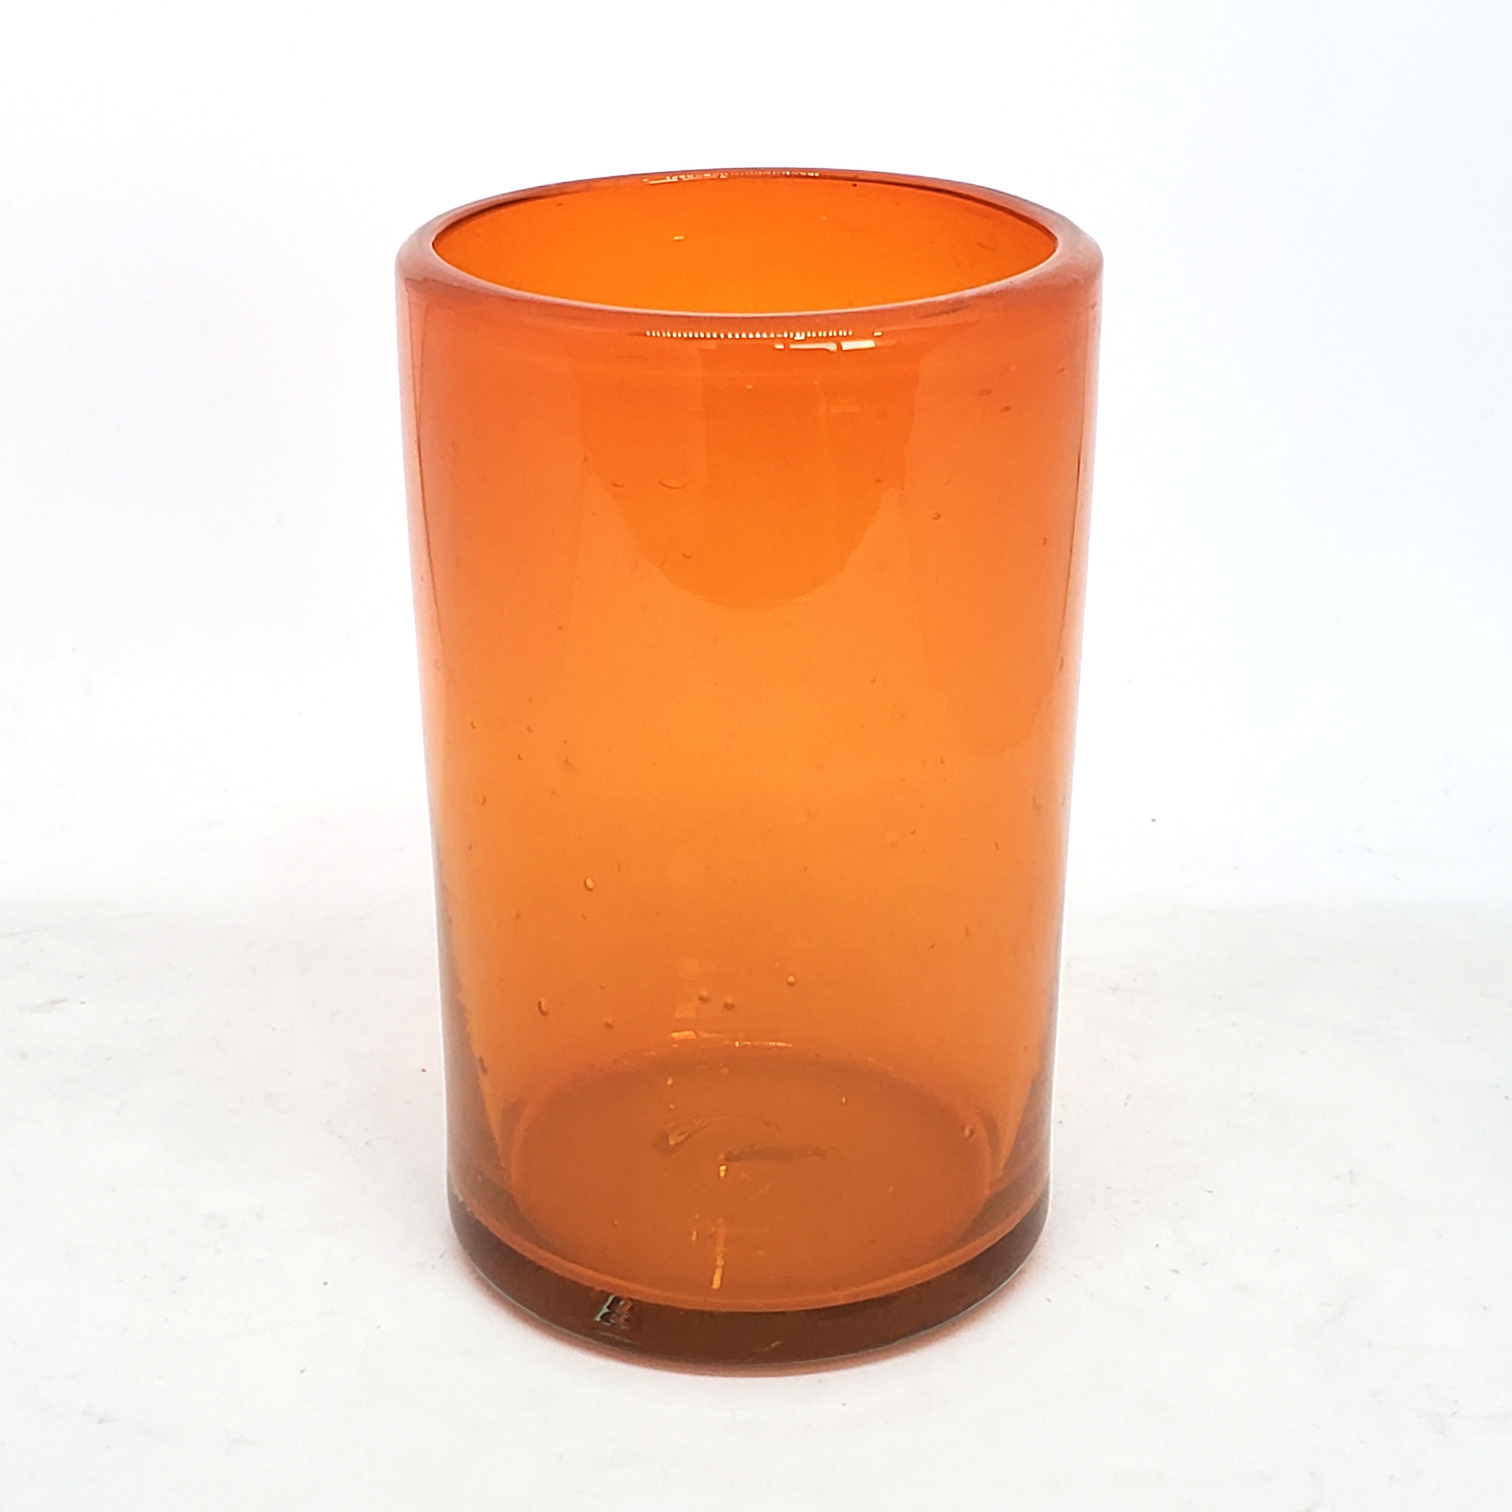 MEXICAN GLASSWARE / Solid Orange 14 oz Drinking Glasses (set of 6) / These handcrafted glasses deliver a classic touch to your favorite drink.